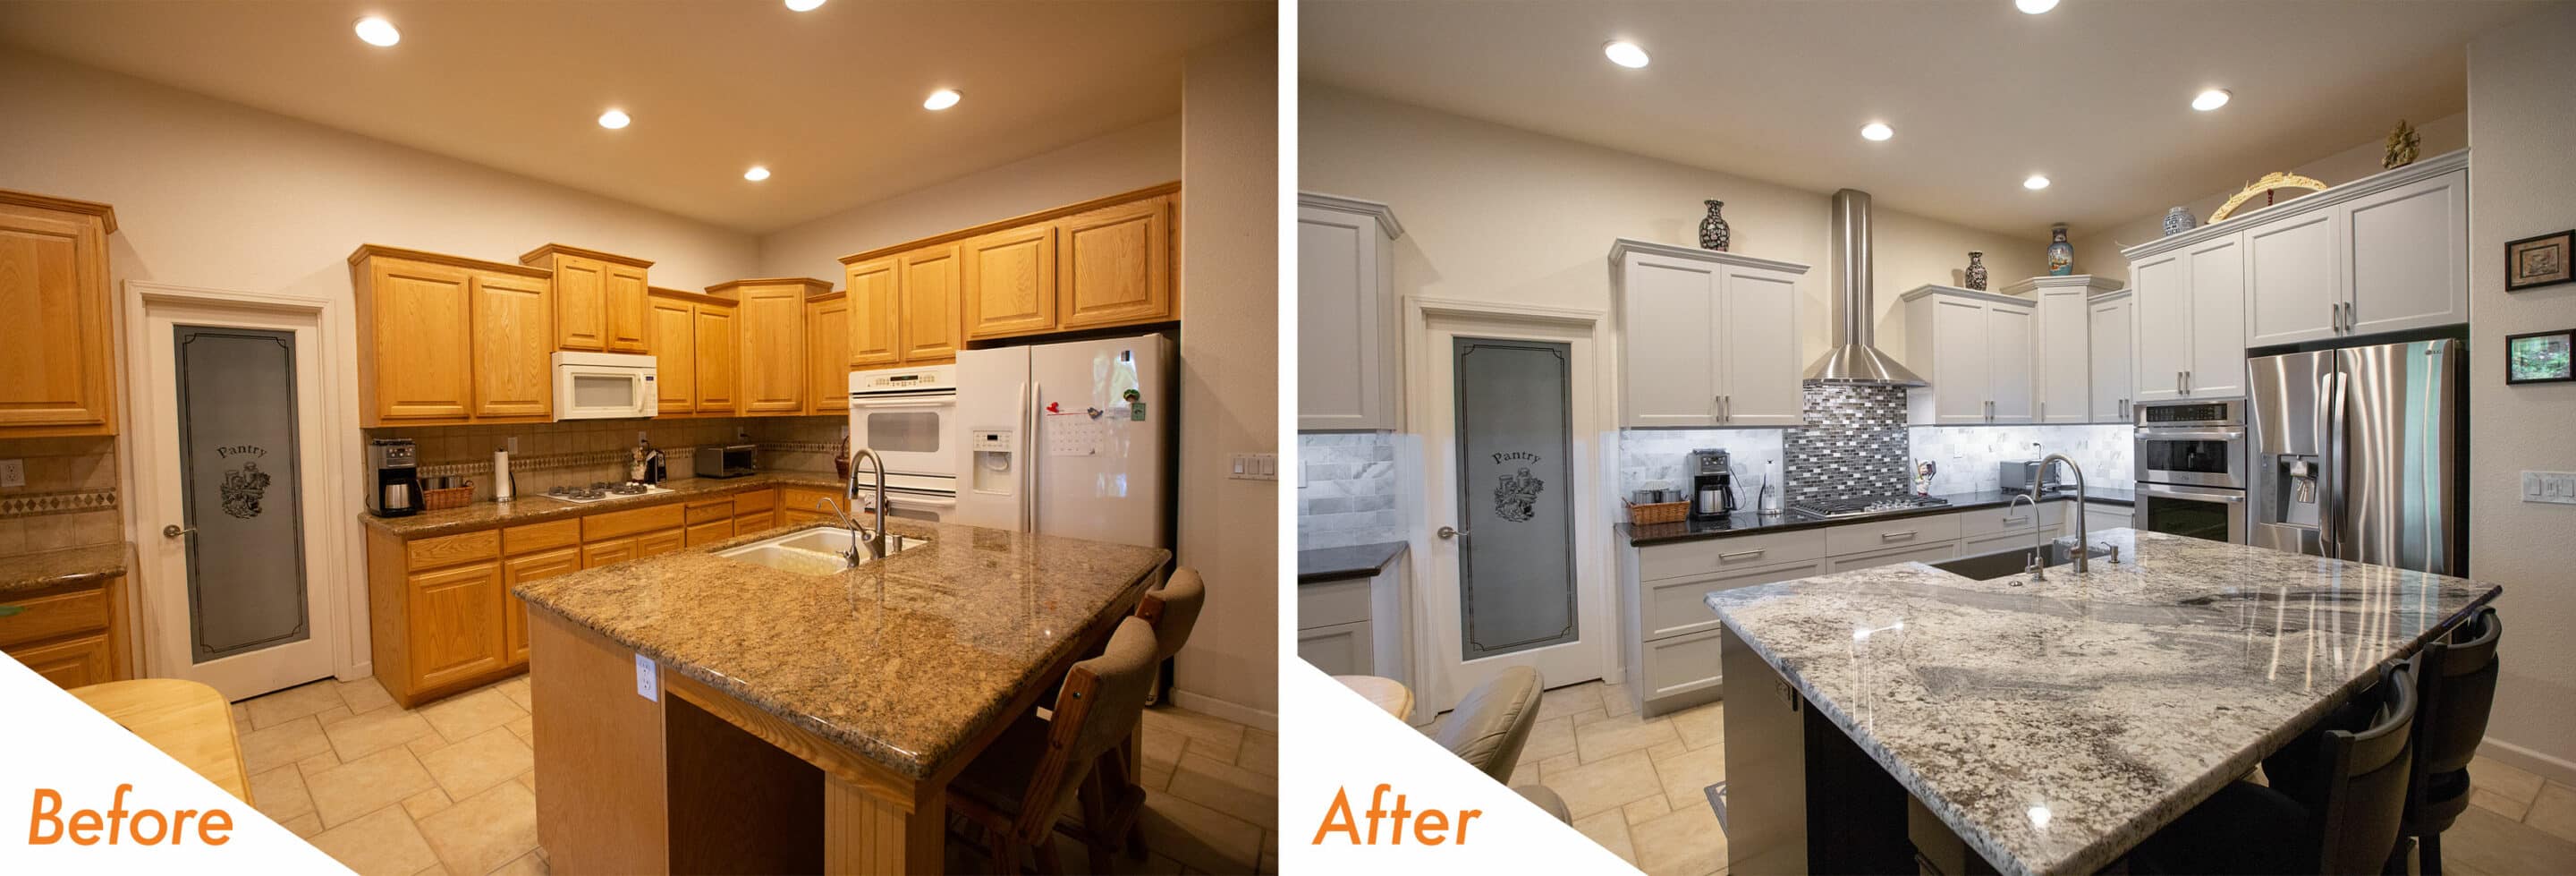 Before & After Custom Kitchen